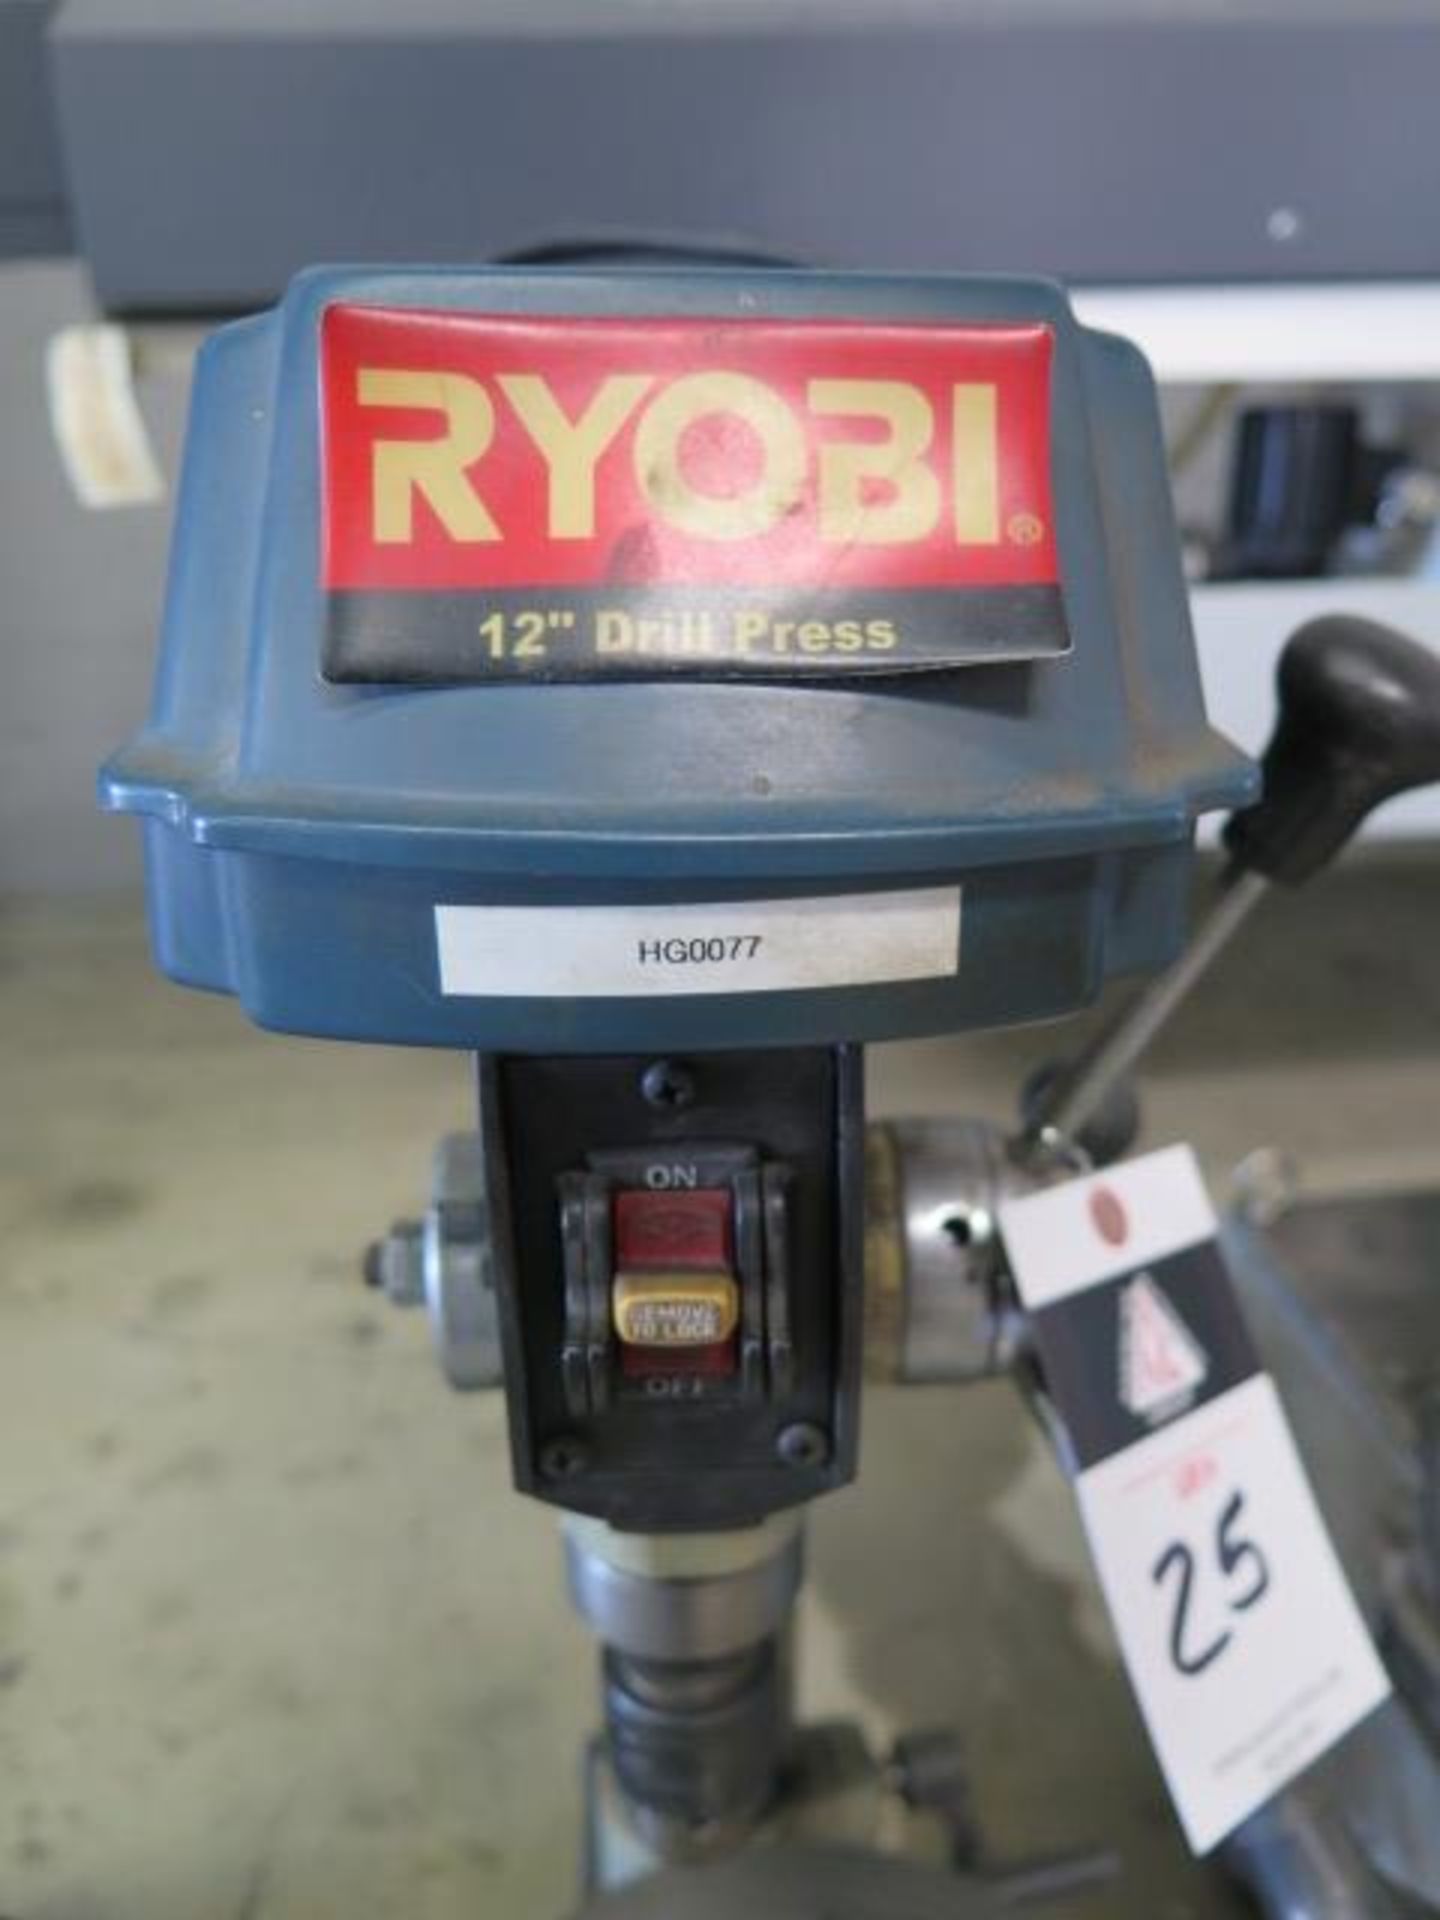 Ryobi Bench Model Drill Press (SOLD AS-IS - NO WARRANTY) - Image 3 of 4